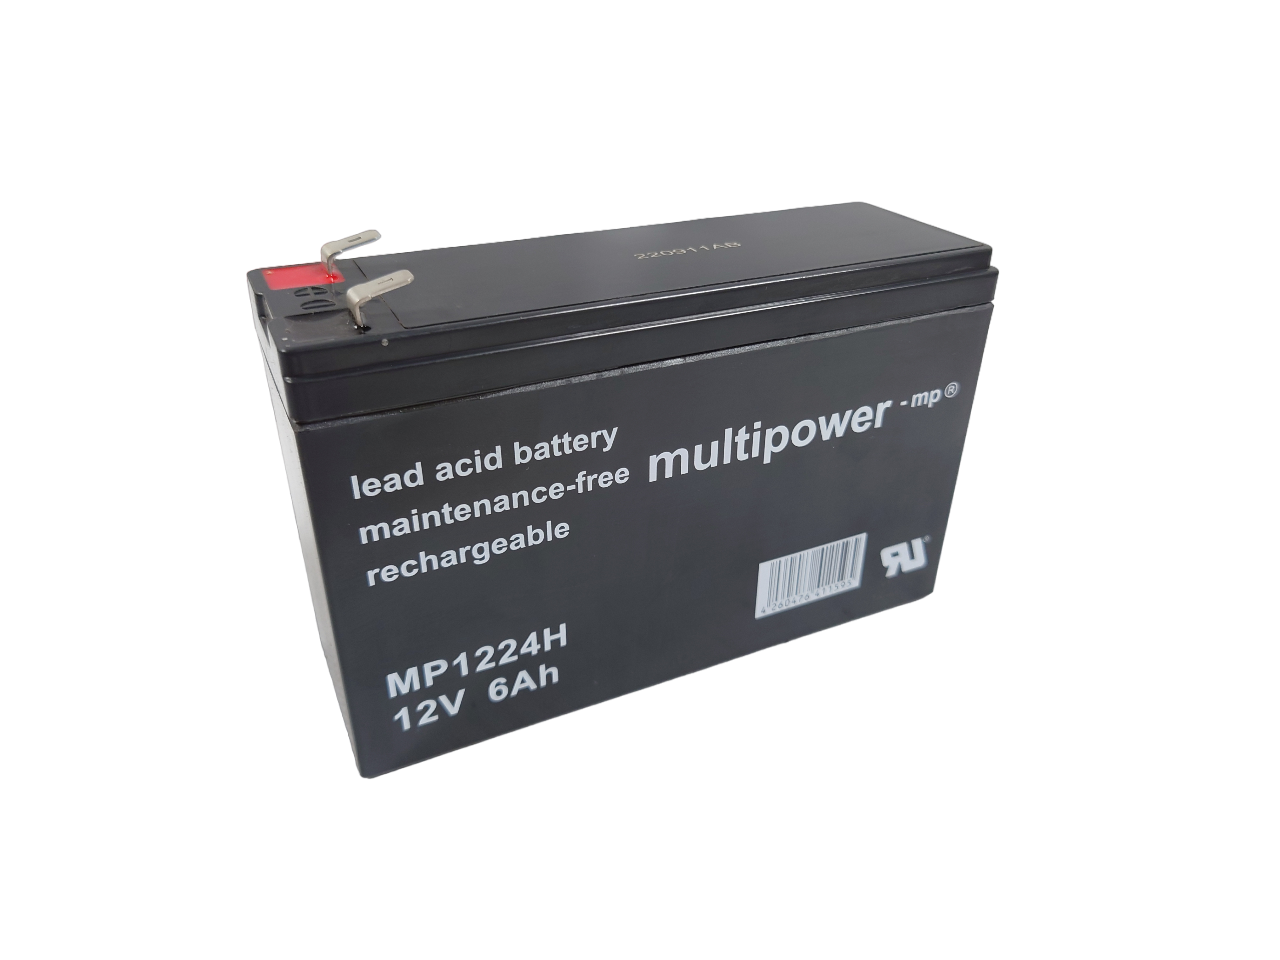 Multipower MP 1224H VdS